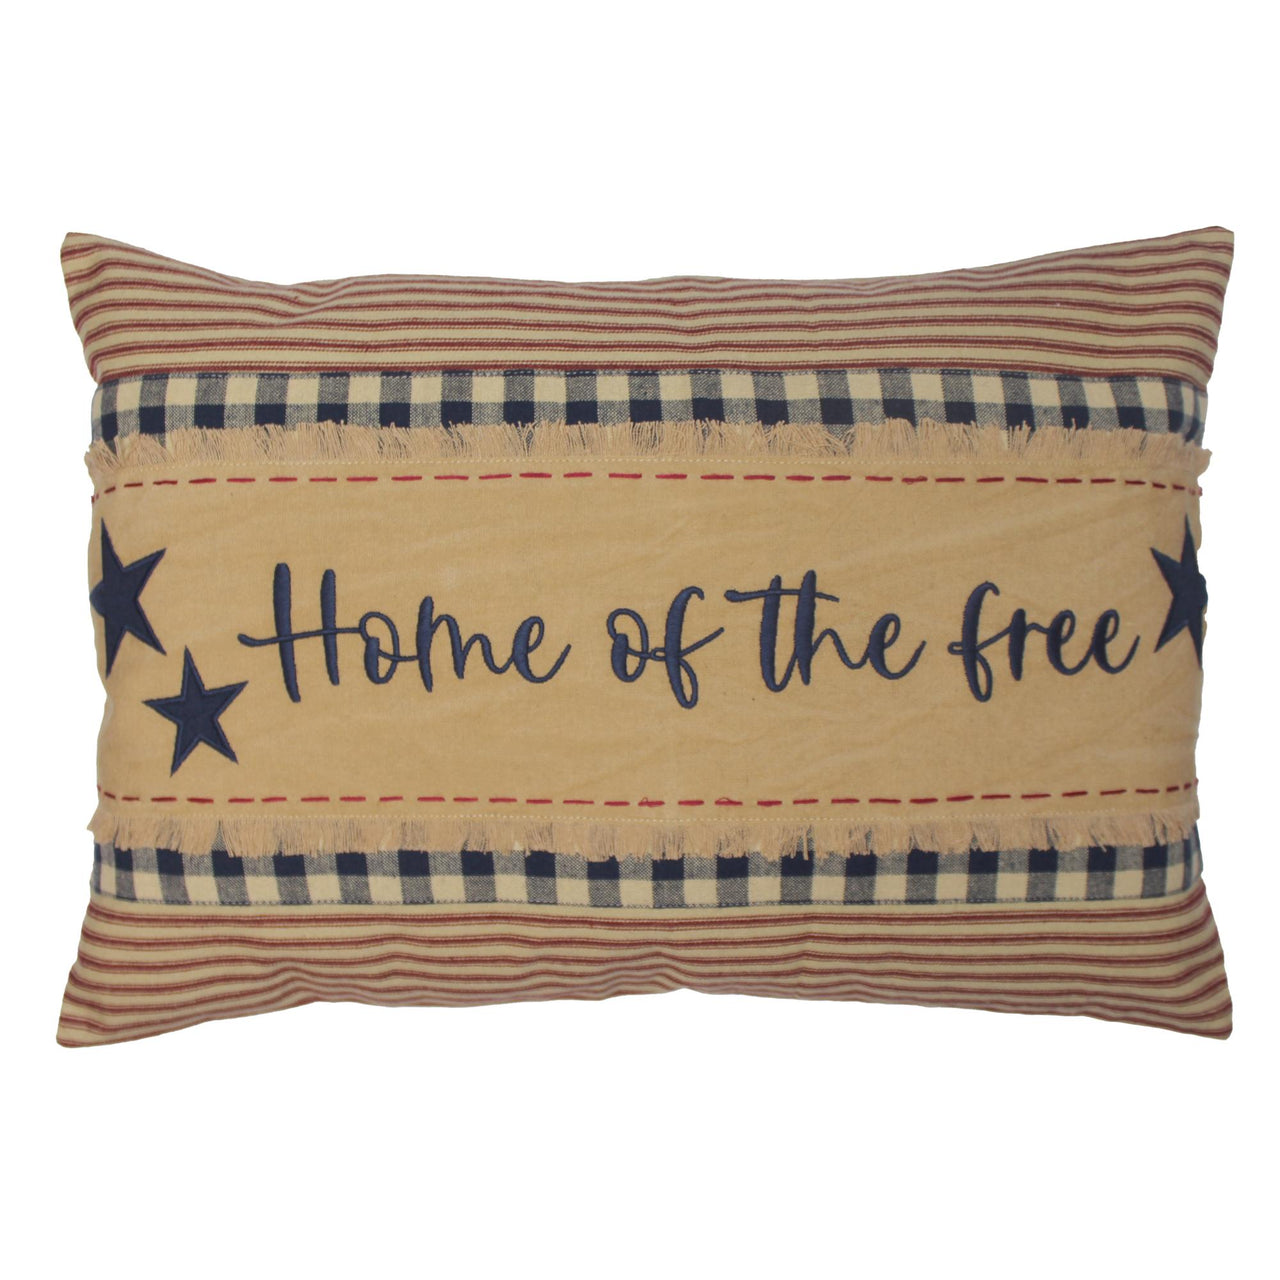 Home of the Free Pillow - Interiors by Elizabeth